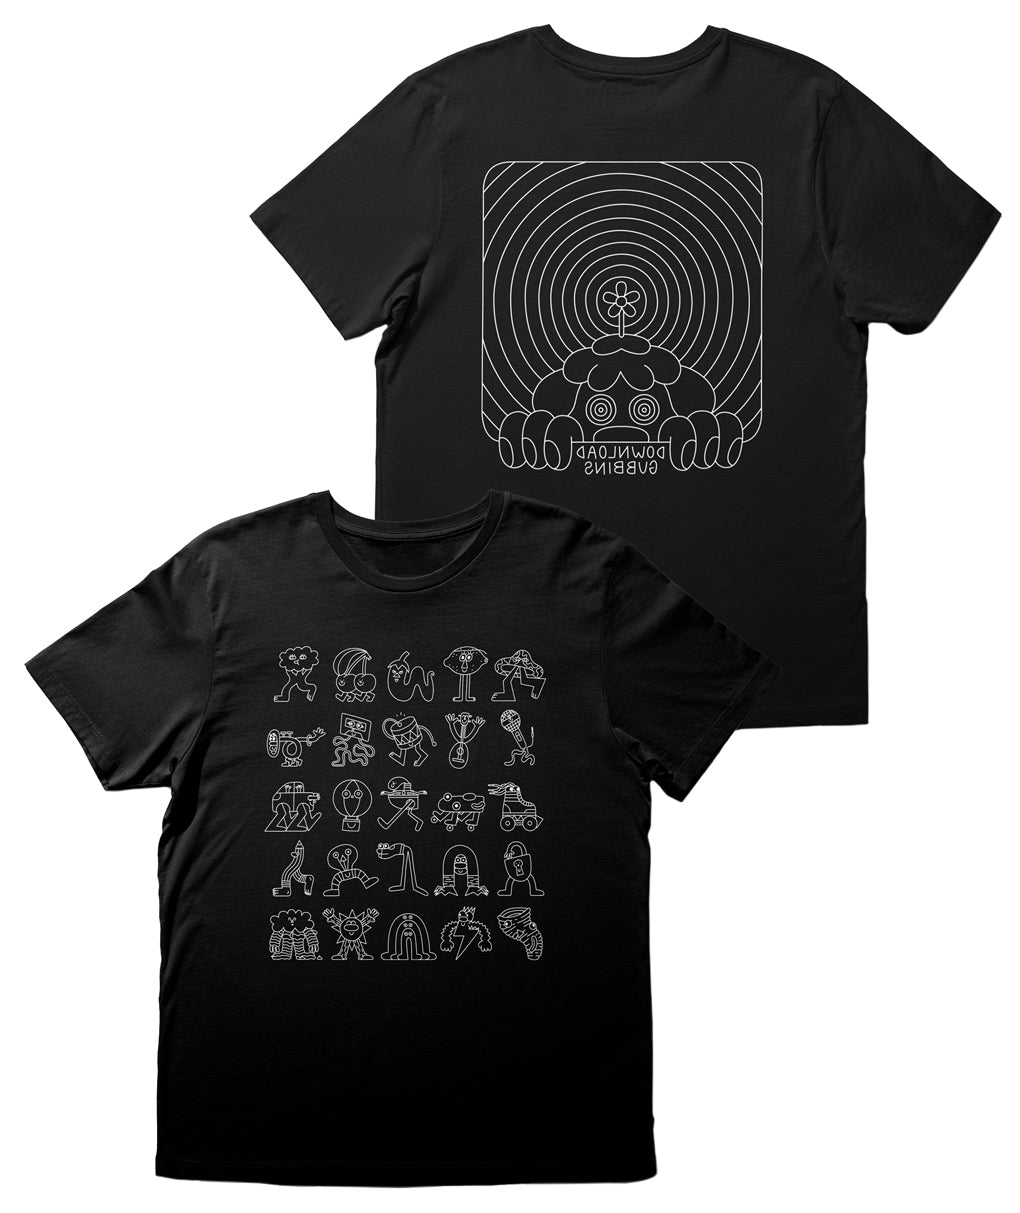 A black t-shirt with a Gubbins’ design on the front and back. The front of the shirt has artwork of many different Gubbins’ characters. The back of the shirt has a large design of a single Gubbins’ character. From Gubbins